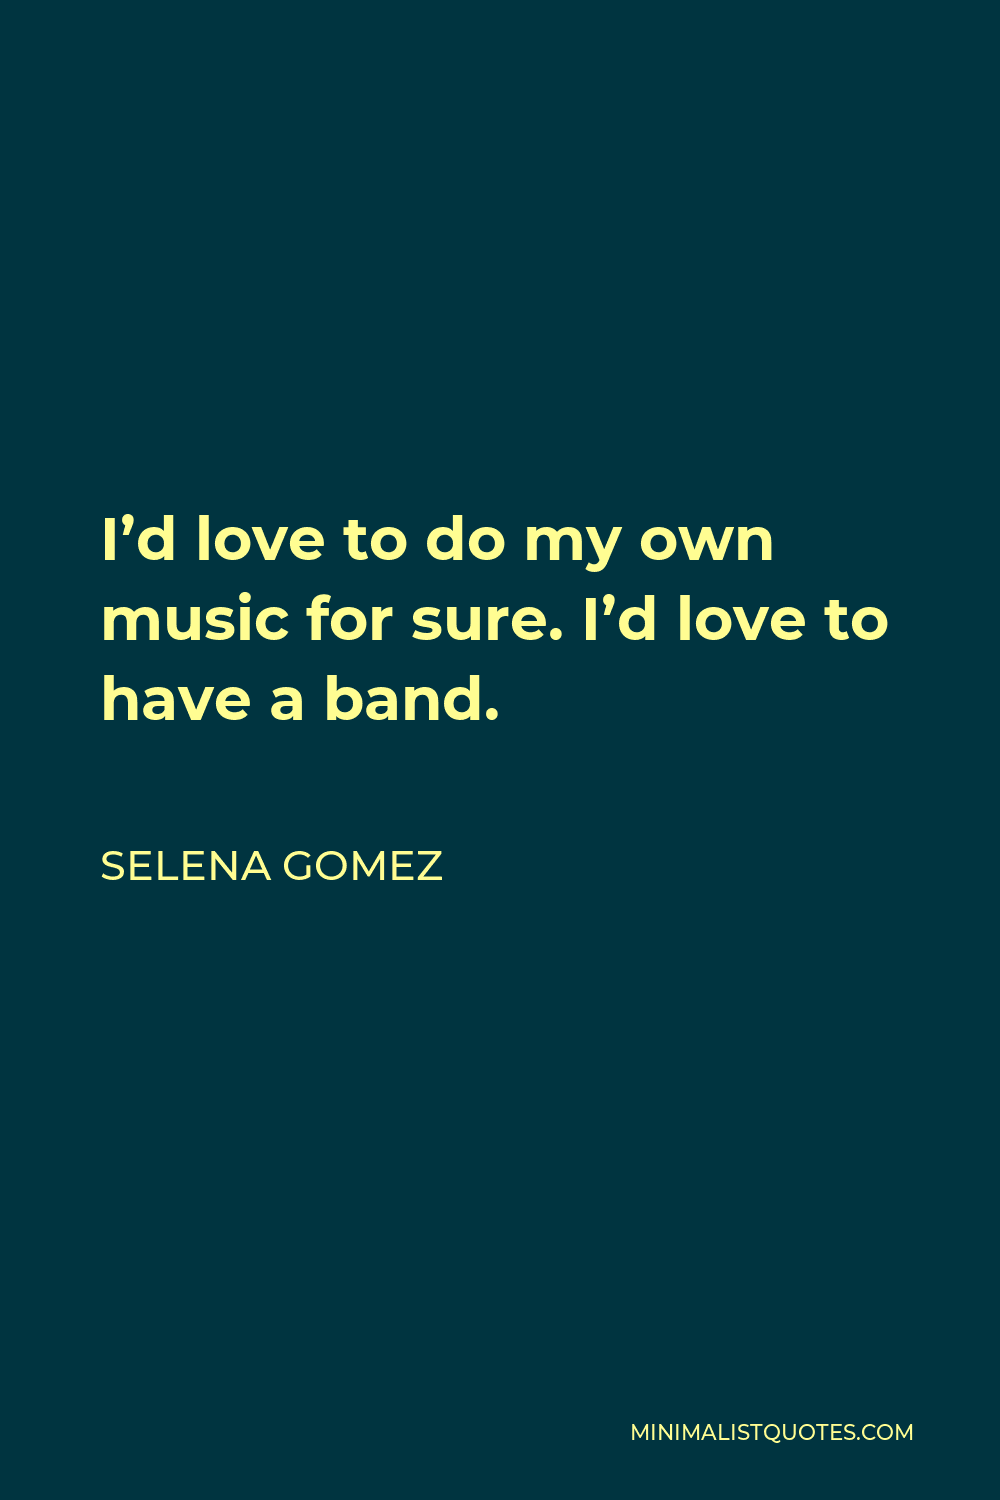 Selena Gomez Quote - I’d love to do my own music for sure. I’d love to have a band.